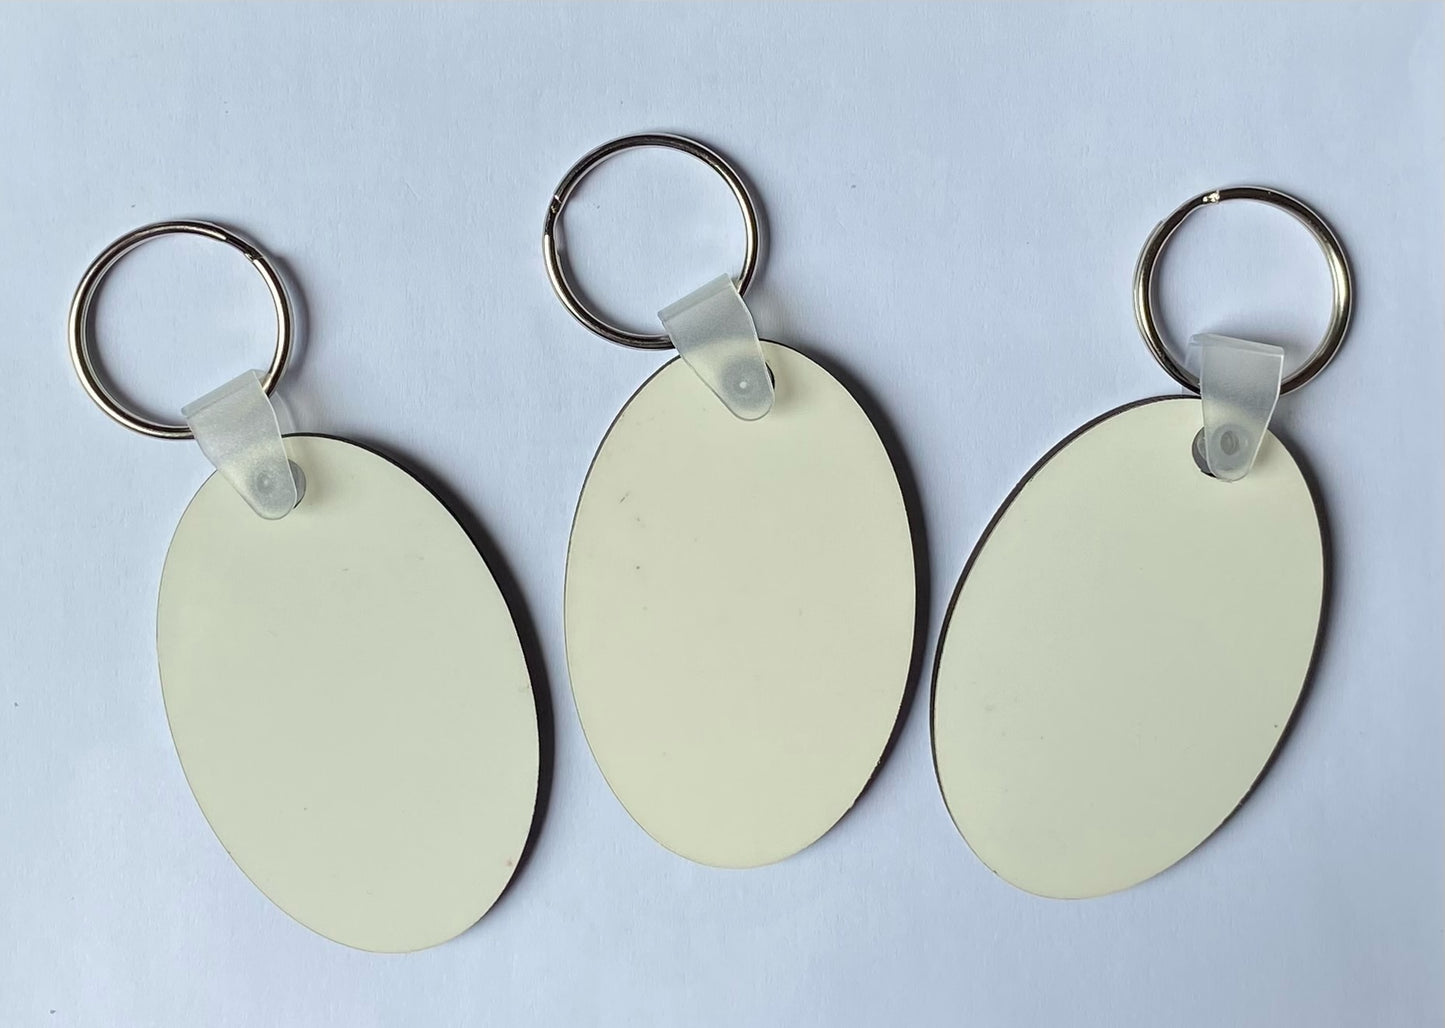 100 x Blank Sublimation MDF Keyrings 6cm x 4cm Double Sided Oval